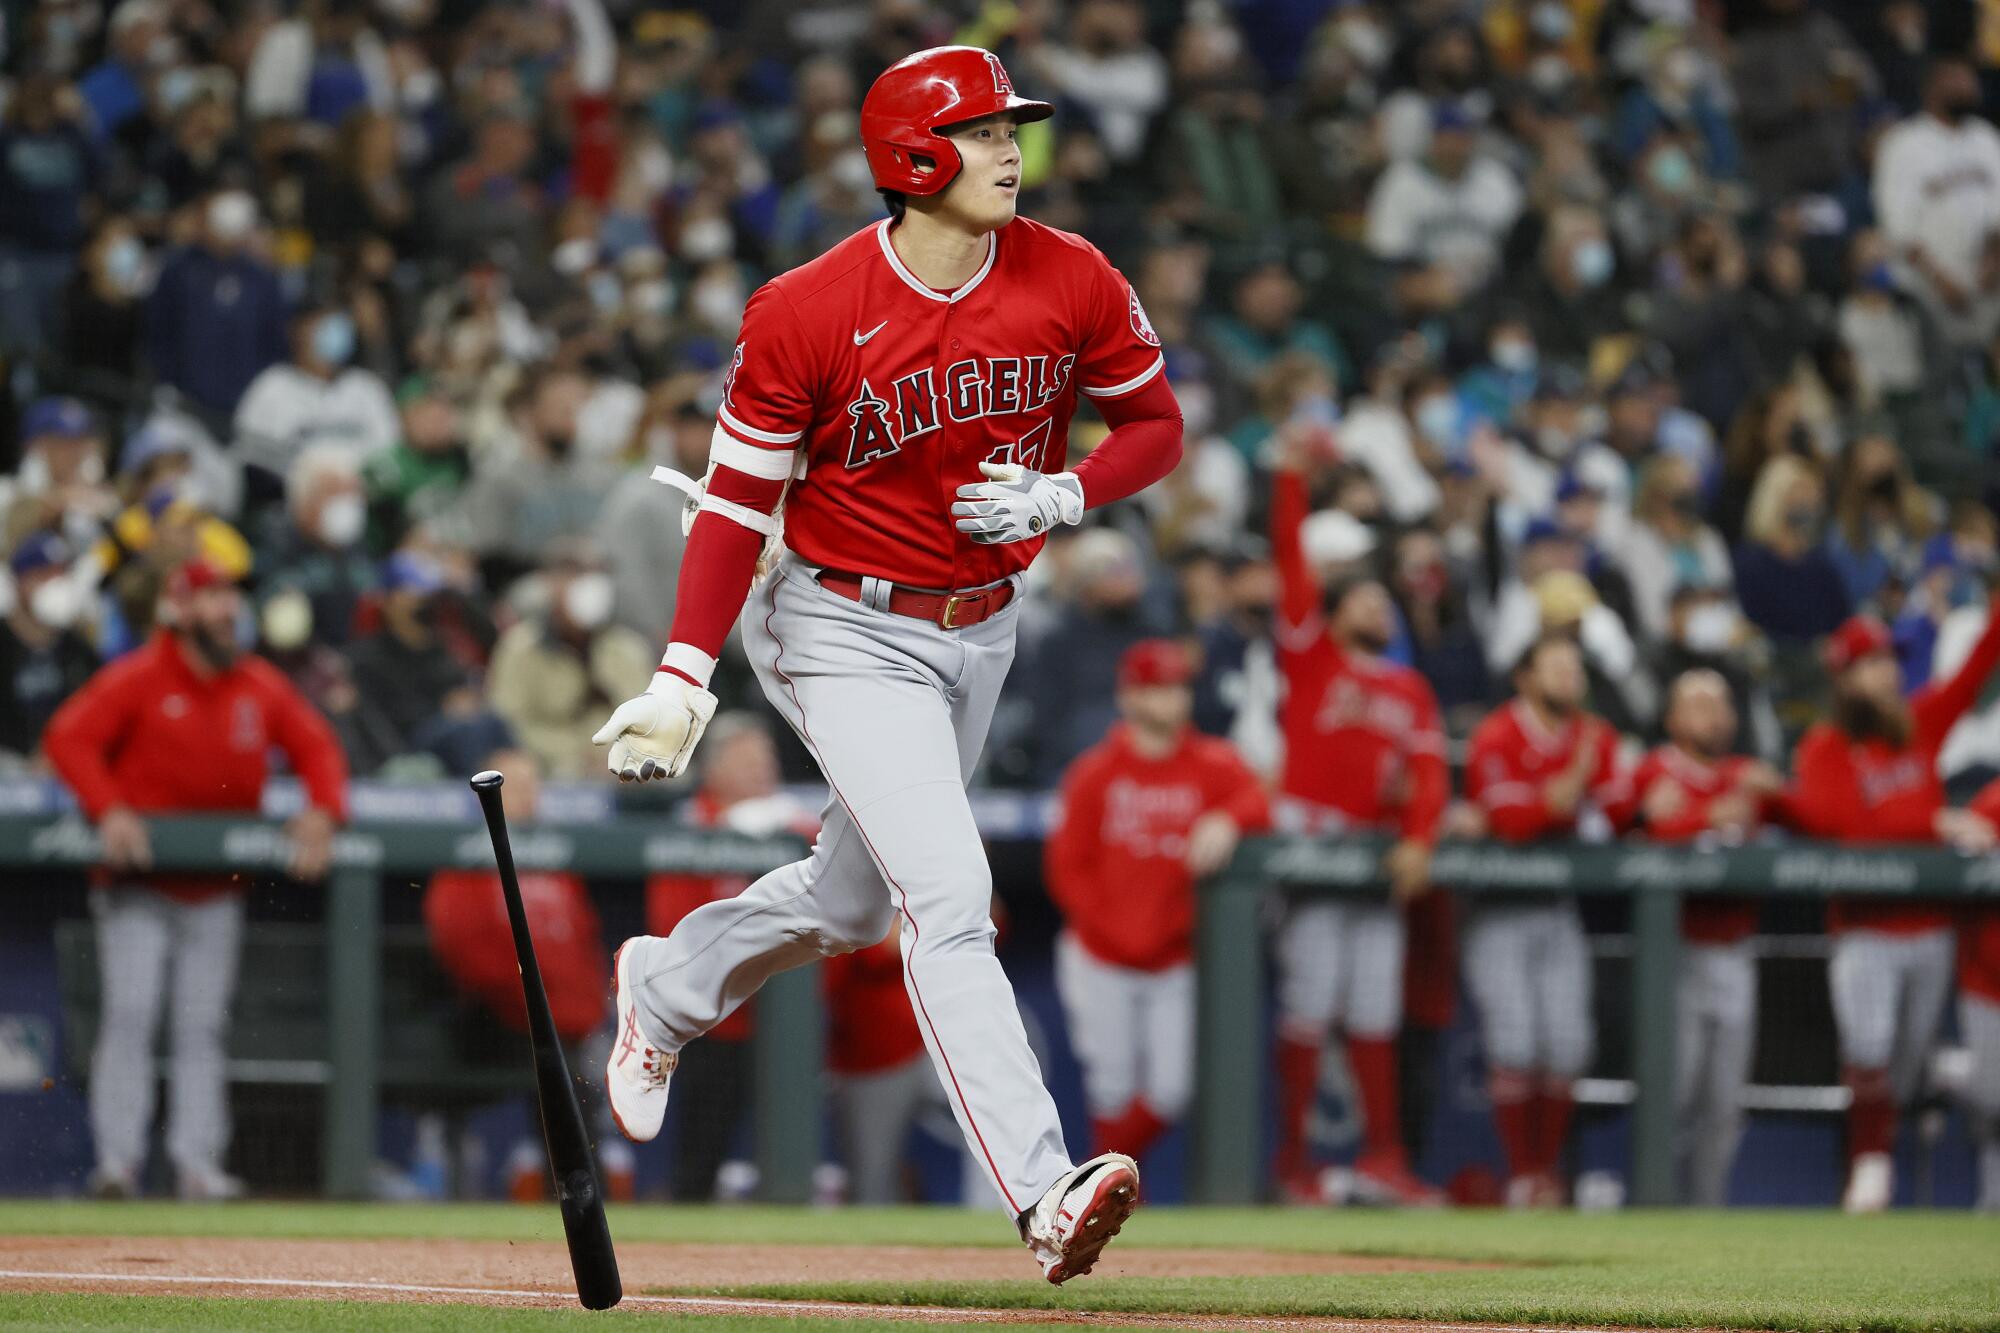 Shohei Ohtani of the Angels watches his home run against the Seattle Mariners.